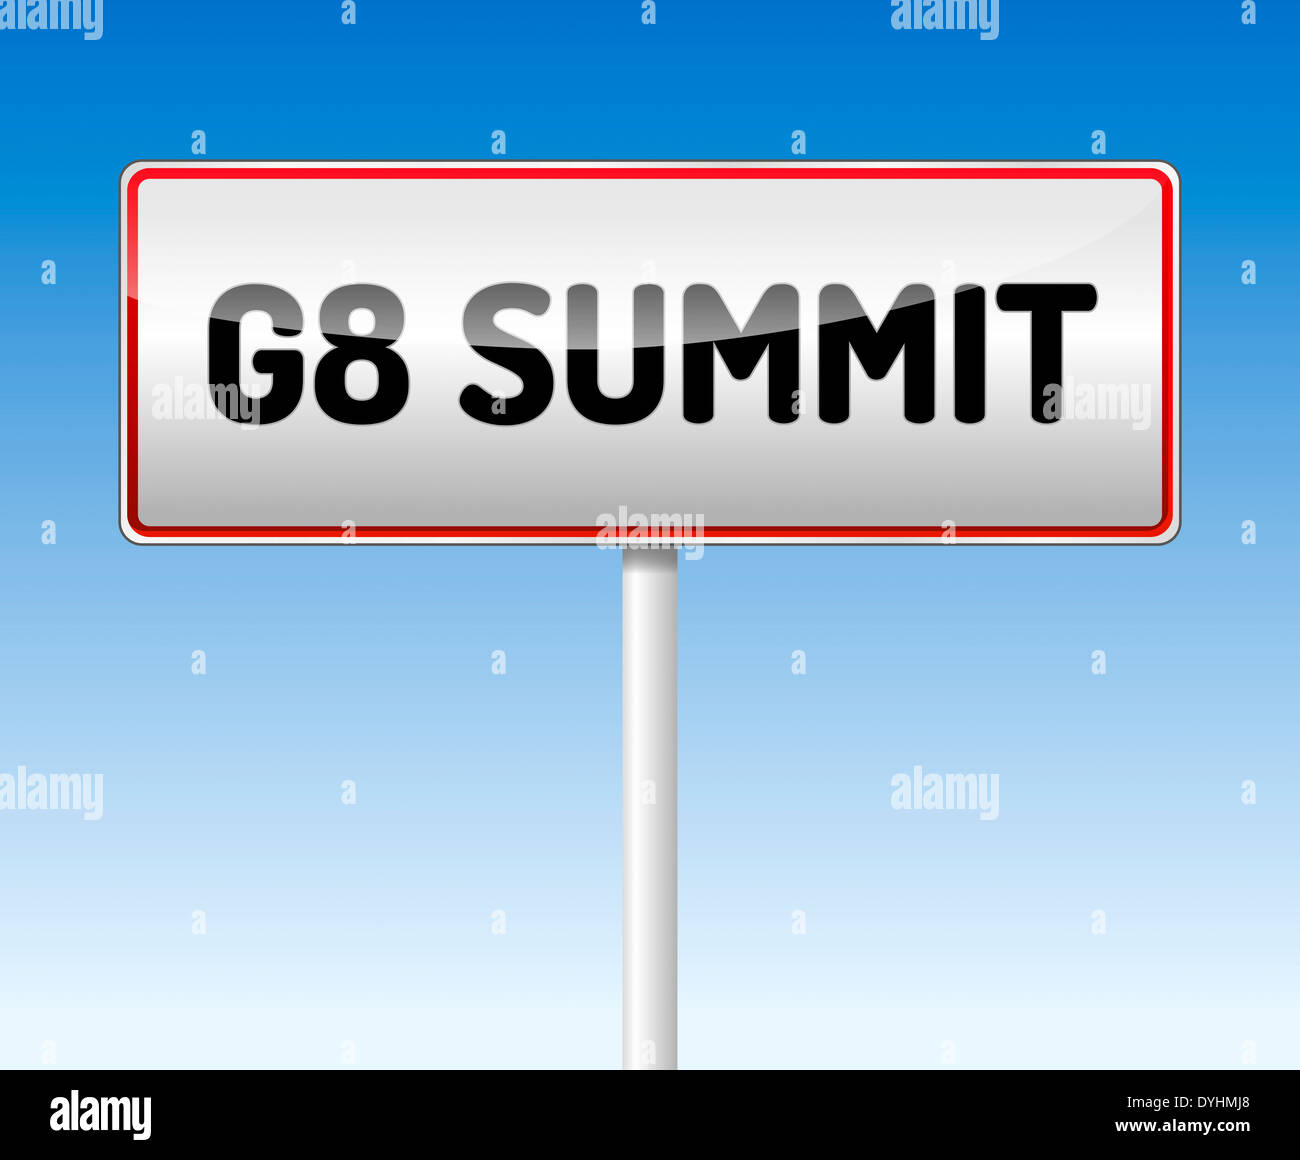 G8 Summit traffic board with blue sky background. Stock Photo